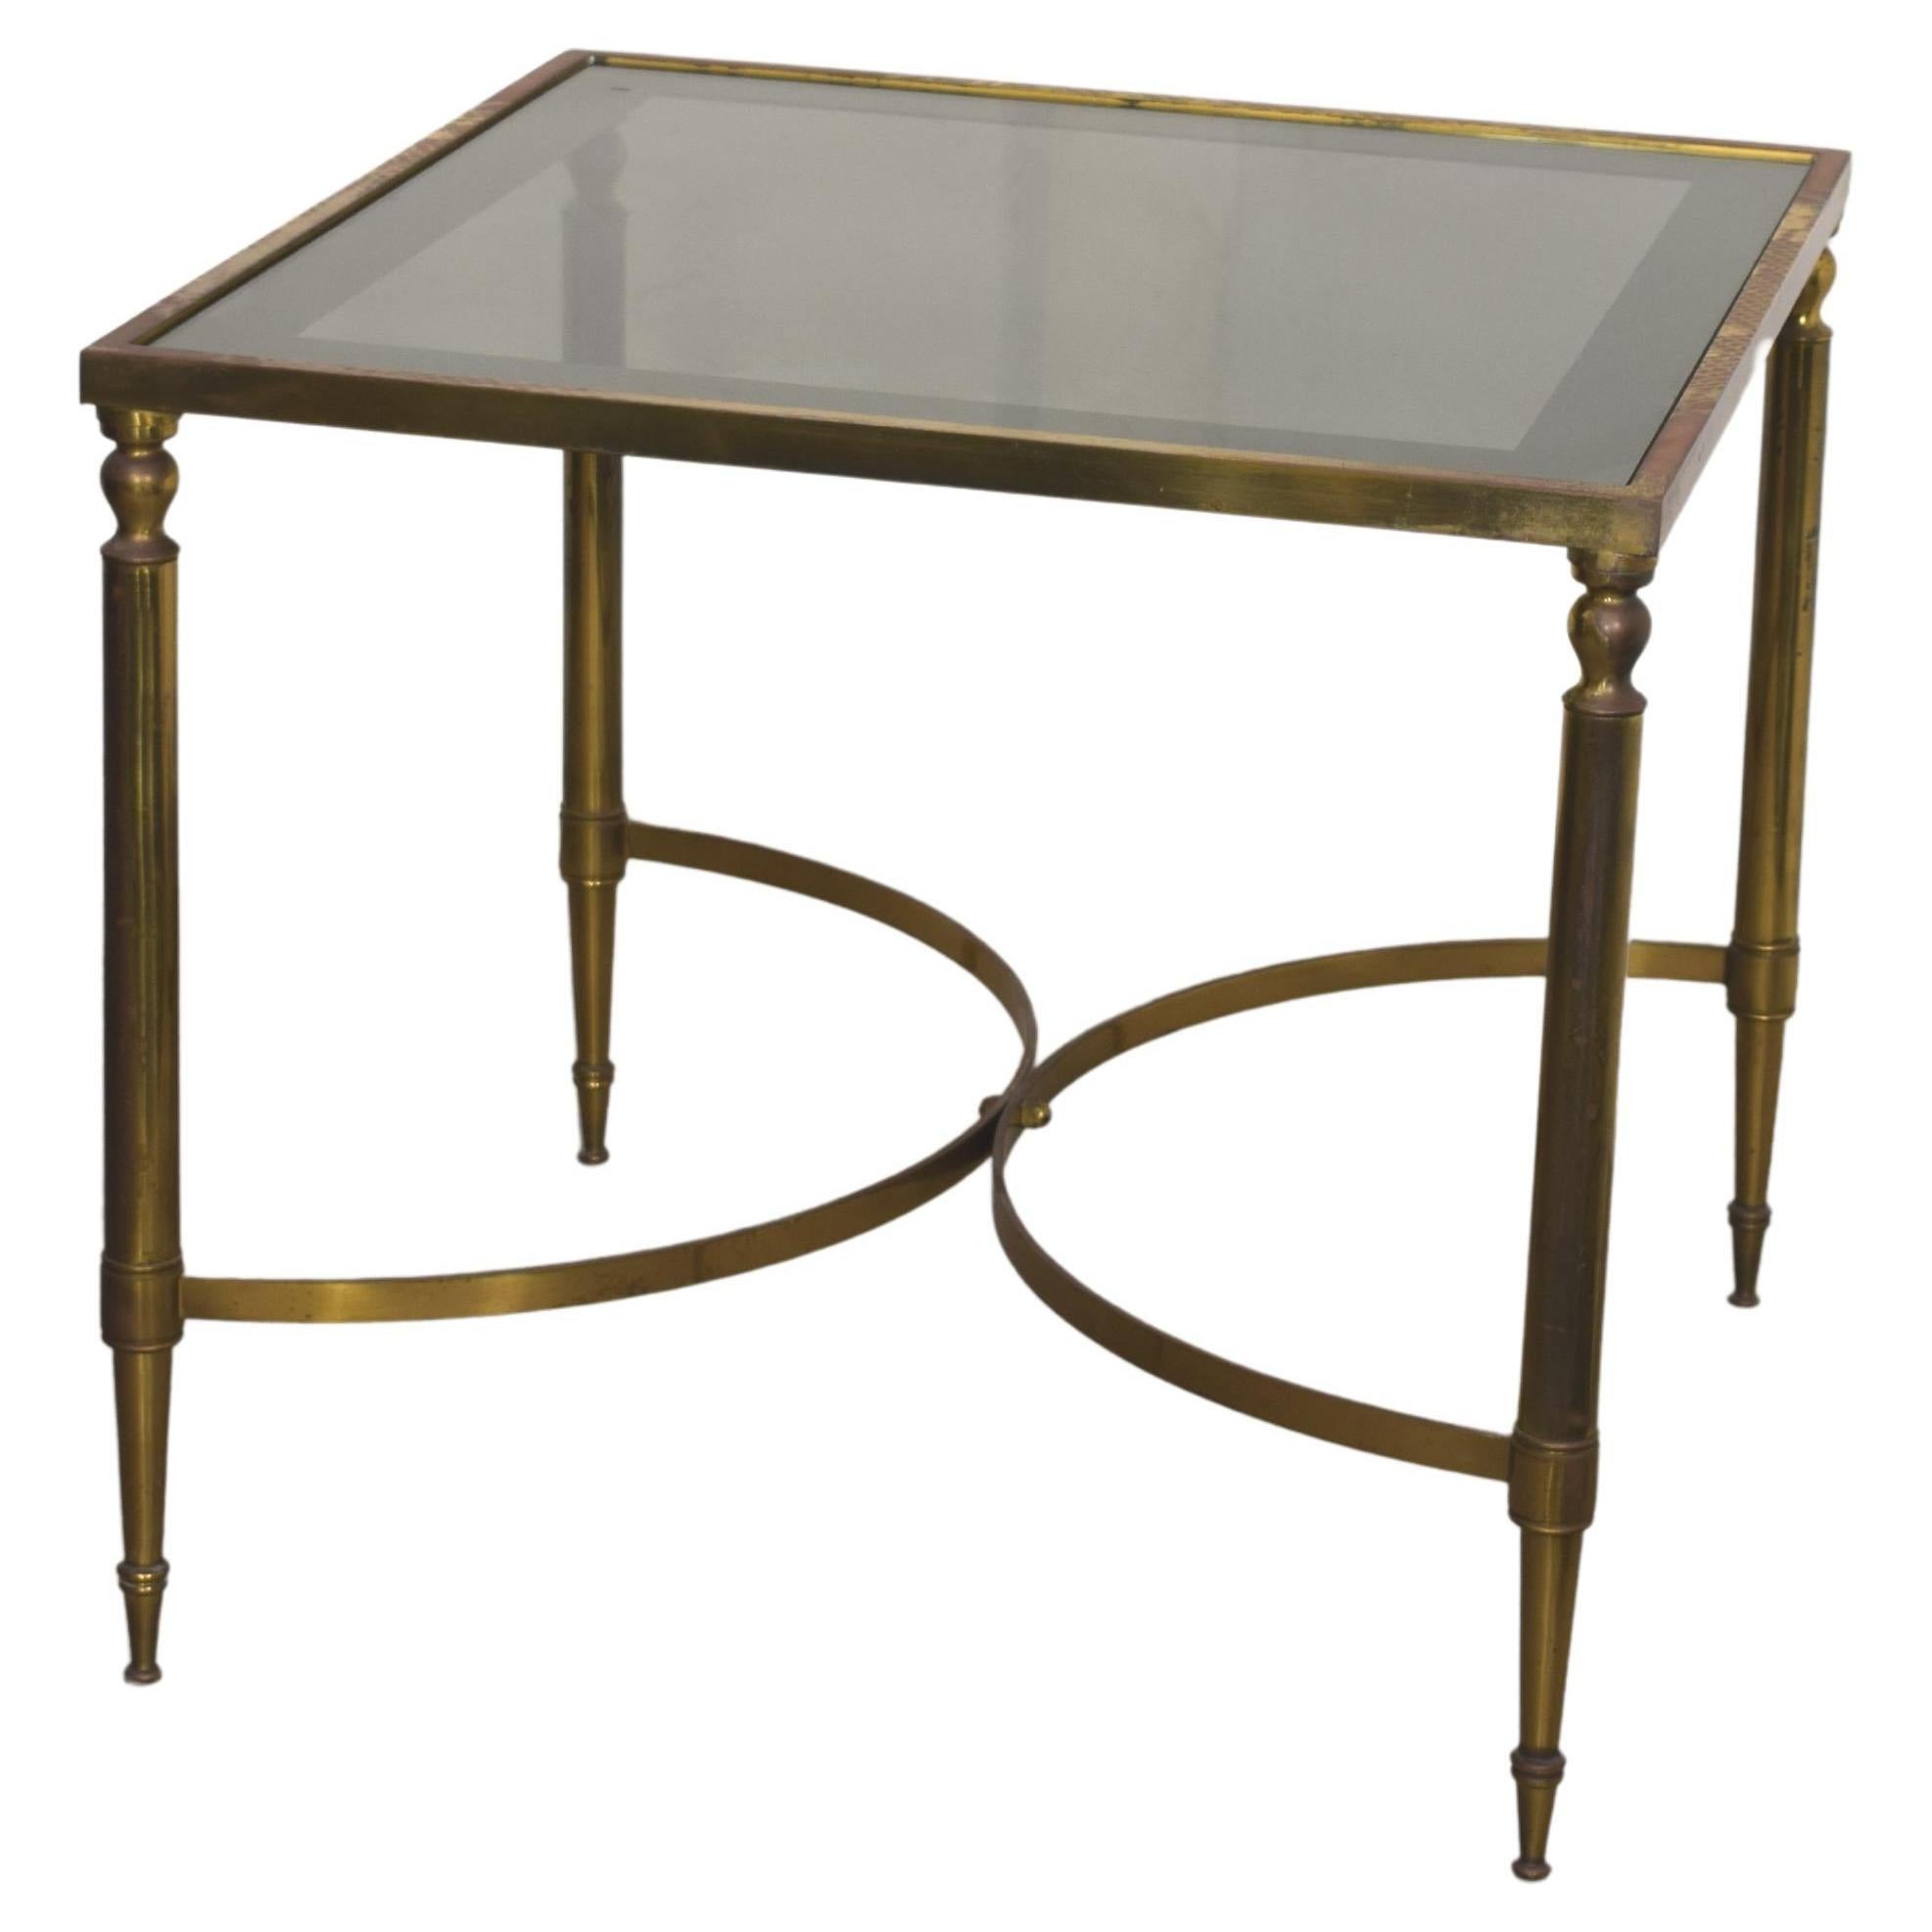 Italian Coffee Table, Brass and Smoked Glass, 1950s For Sale